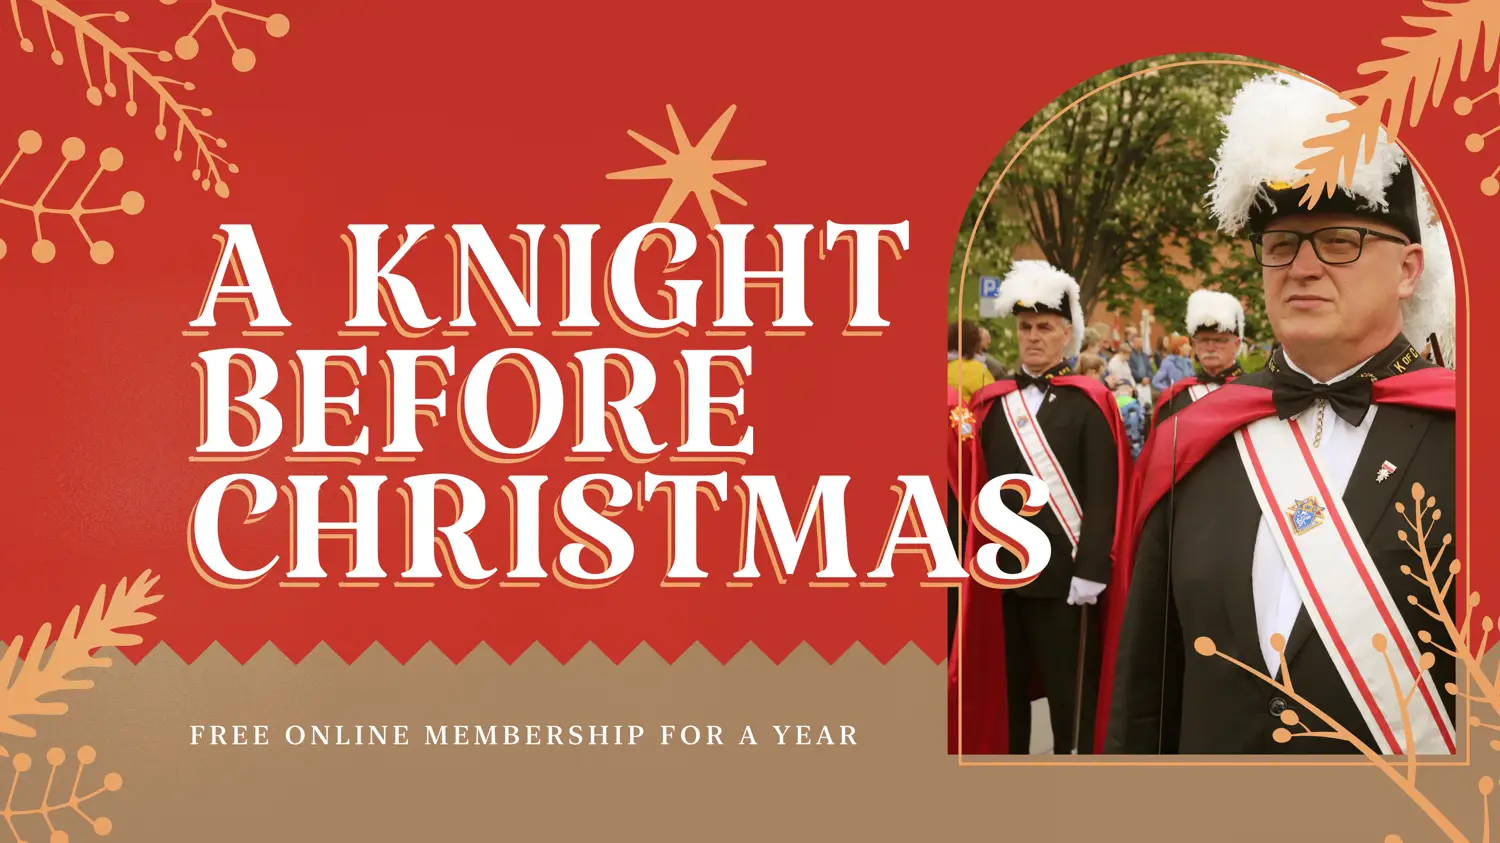 Become a knight before Christmas